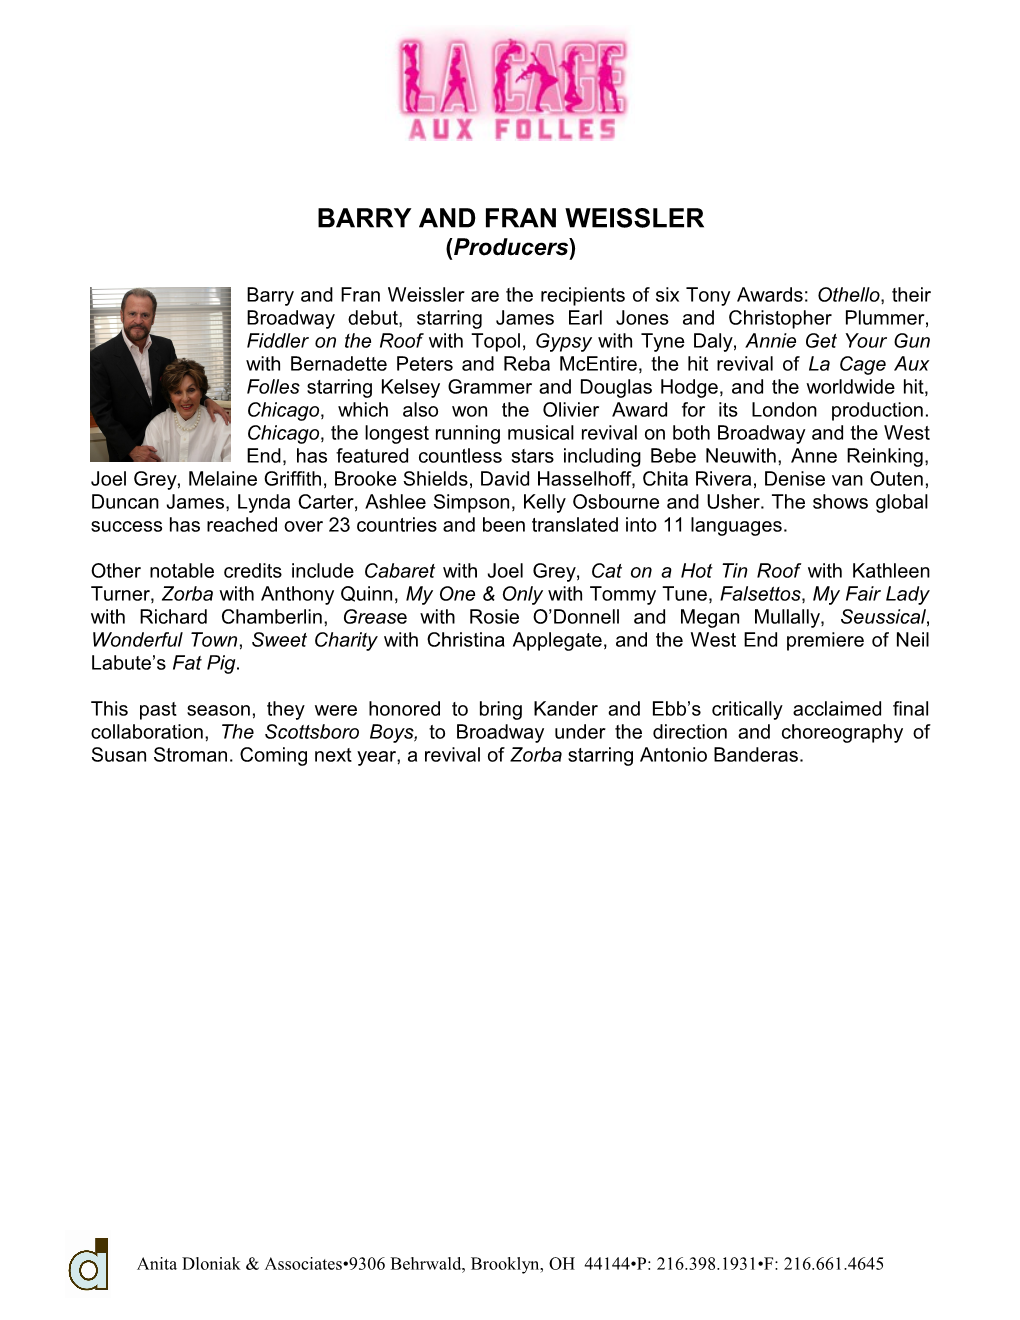 Barry and Fran Weissler